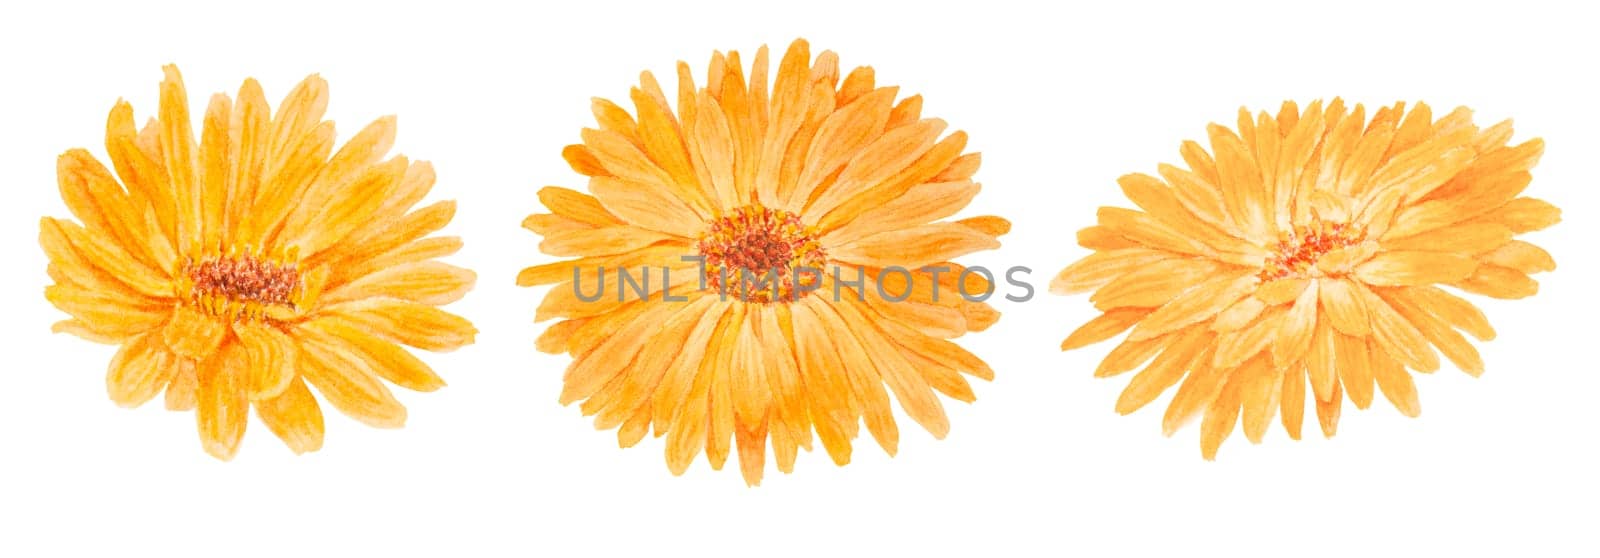 Orange calendula officinalis watercolor hand drawn illustration. Sunny ruddles flower with yellow petals and green leaves for natural herbal medicine, healthy tea, cosmetics and homeopatic remedies. Marigold botanical clip art good as an element for packaging design, labels, eco goods, textile, invitations